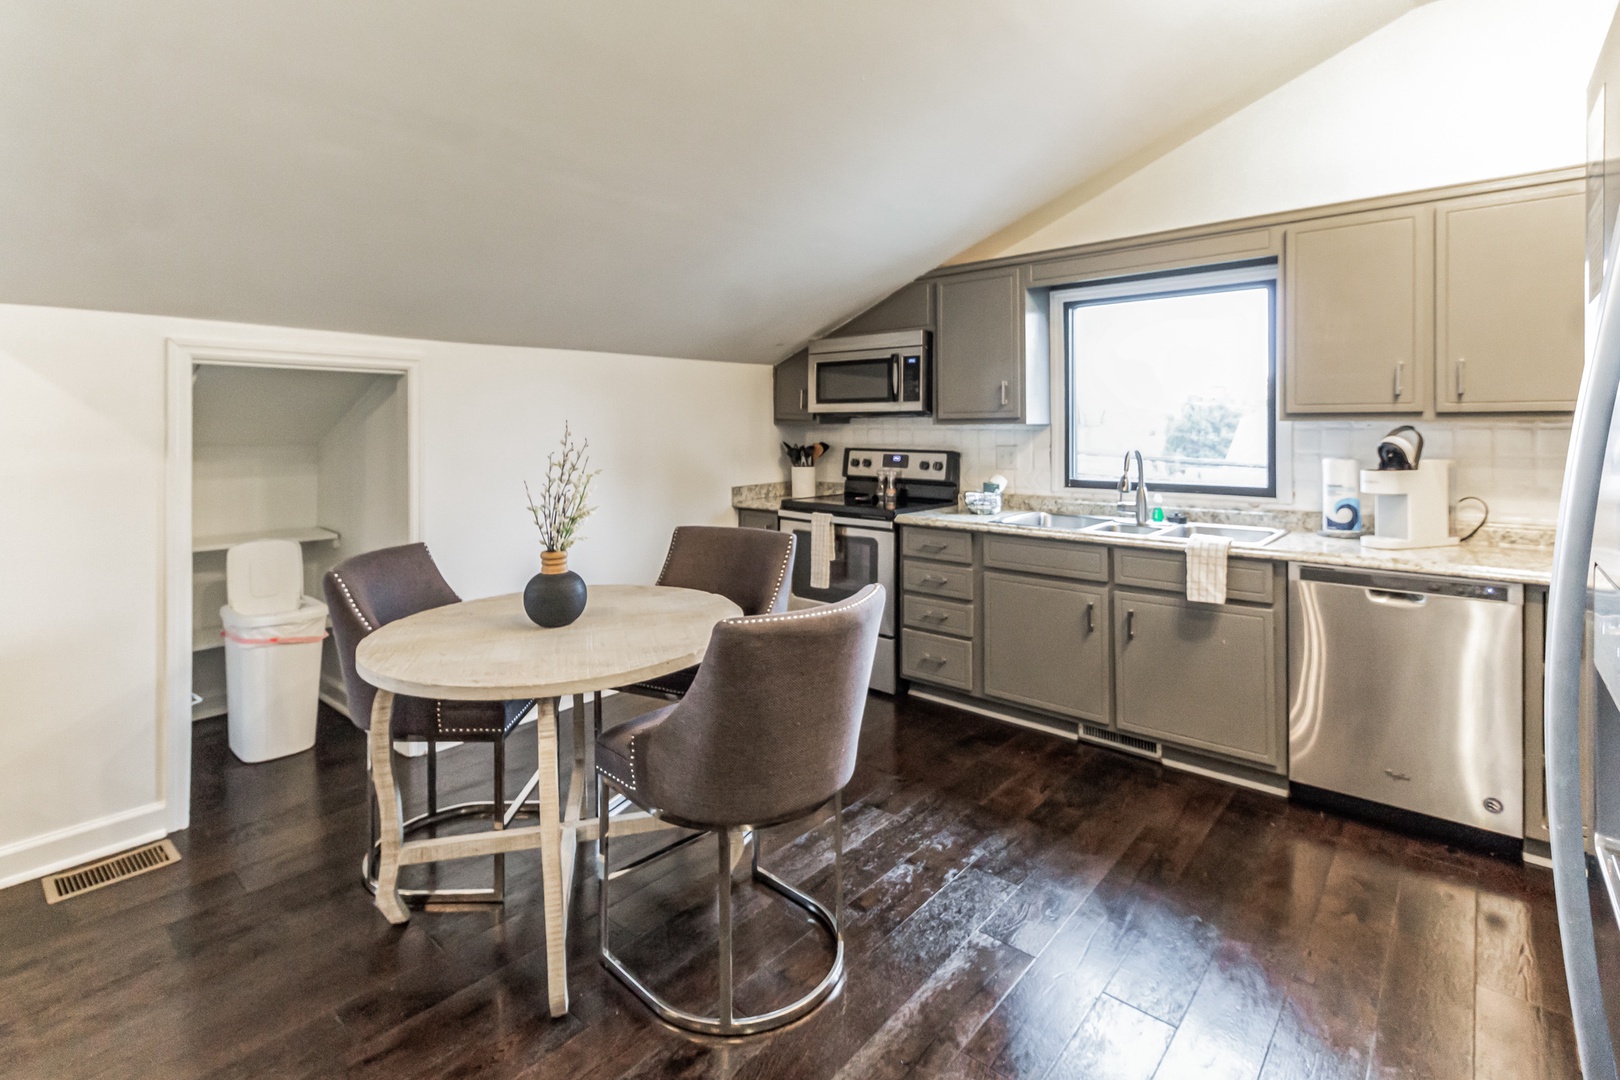 Unit C2: The open, airy kitchen offers ample space & all the comforts of home